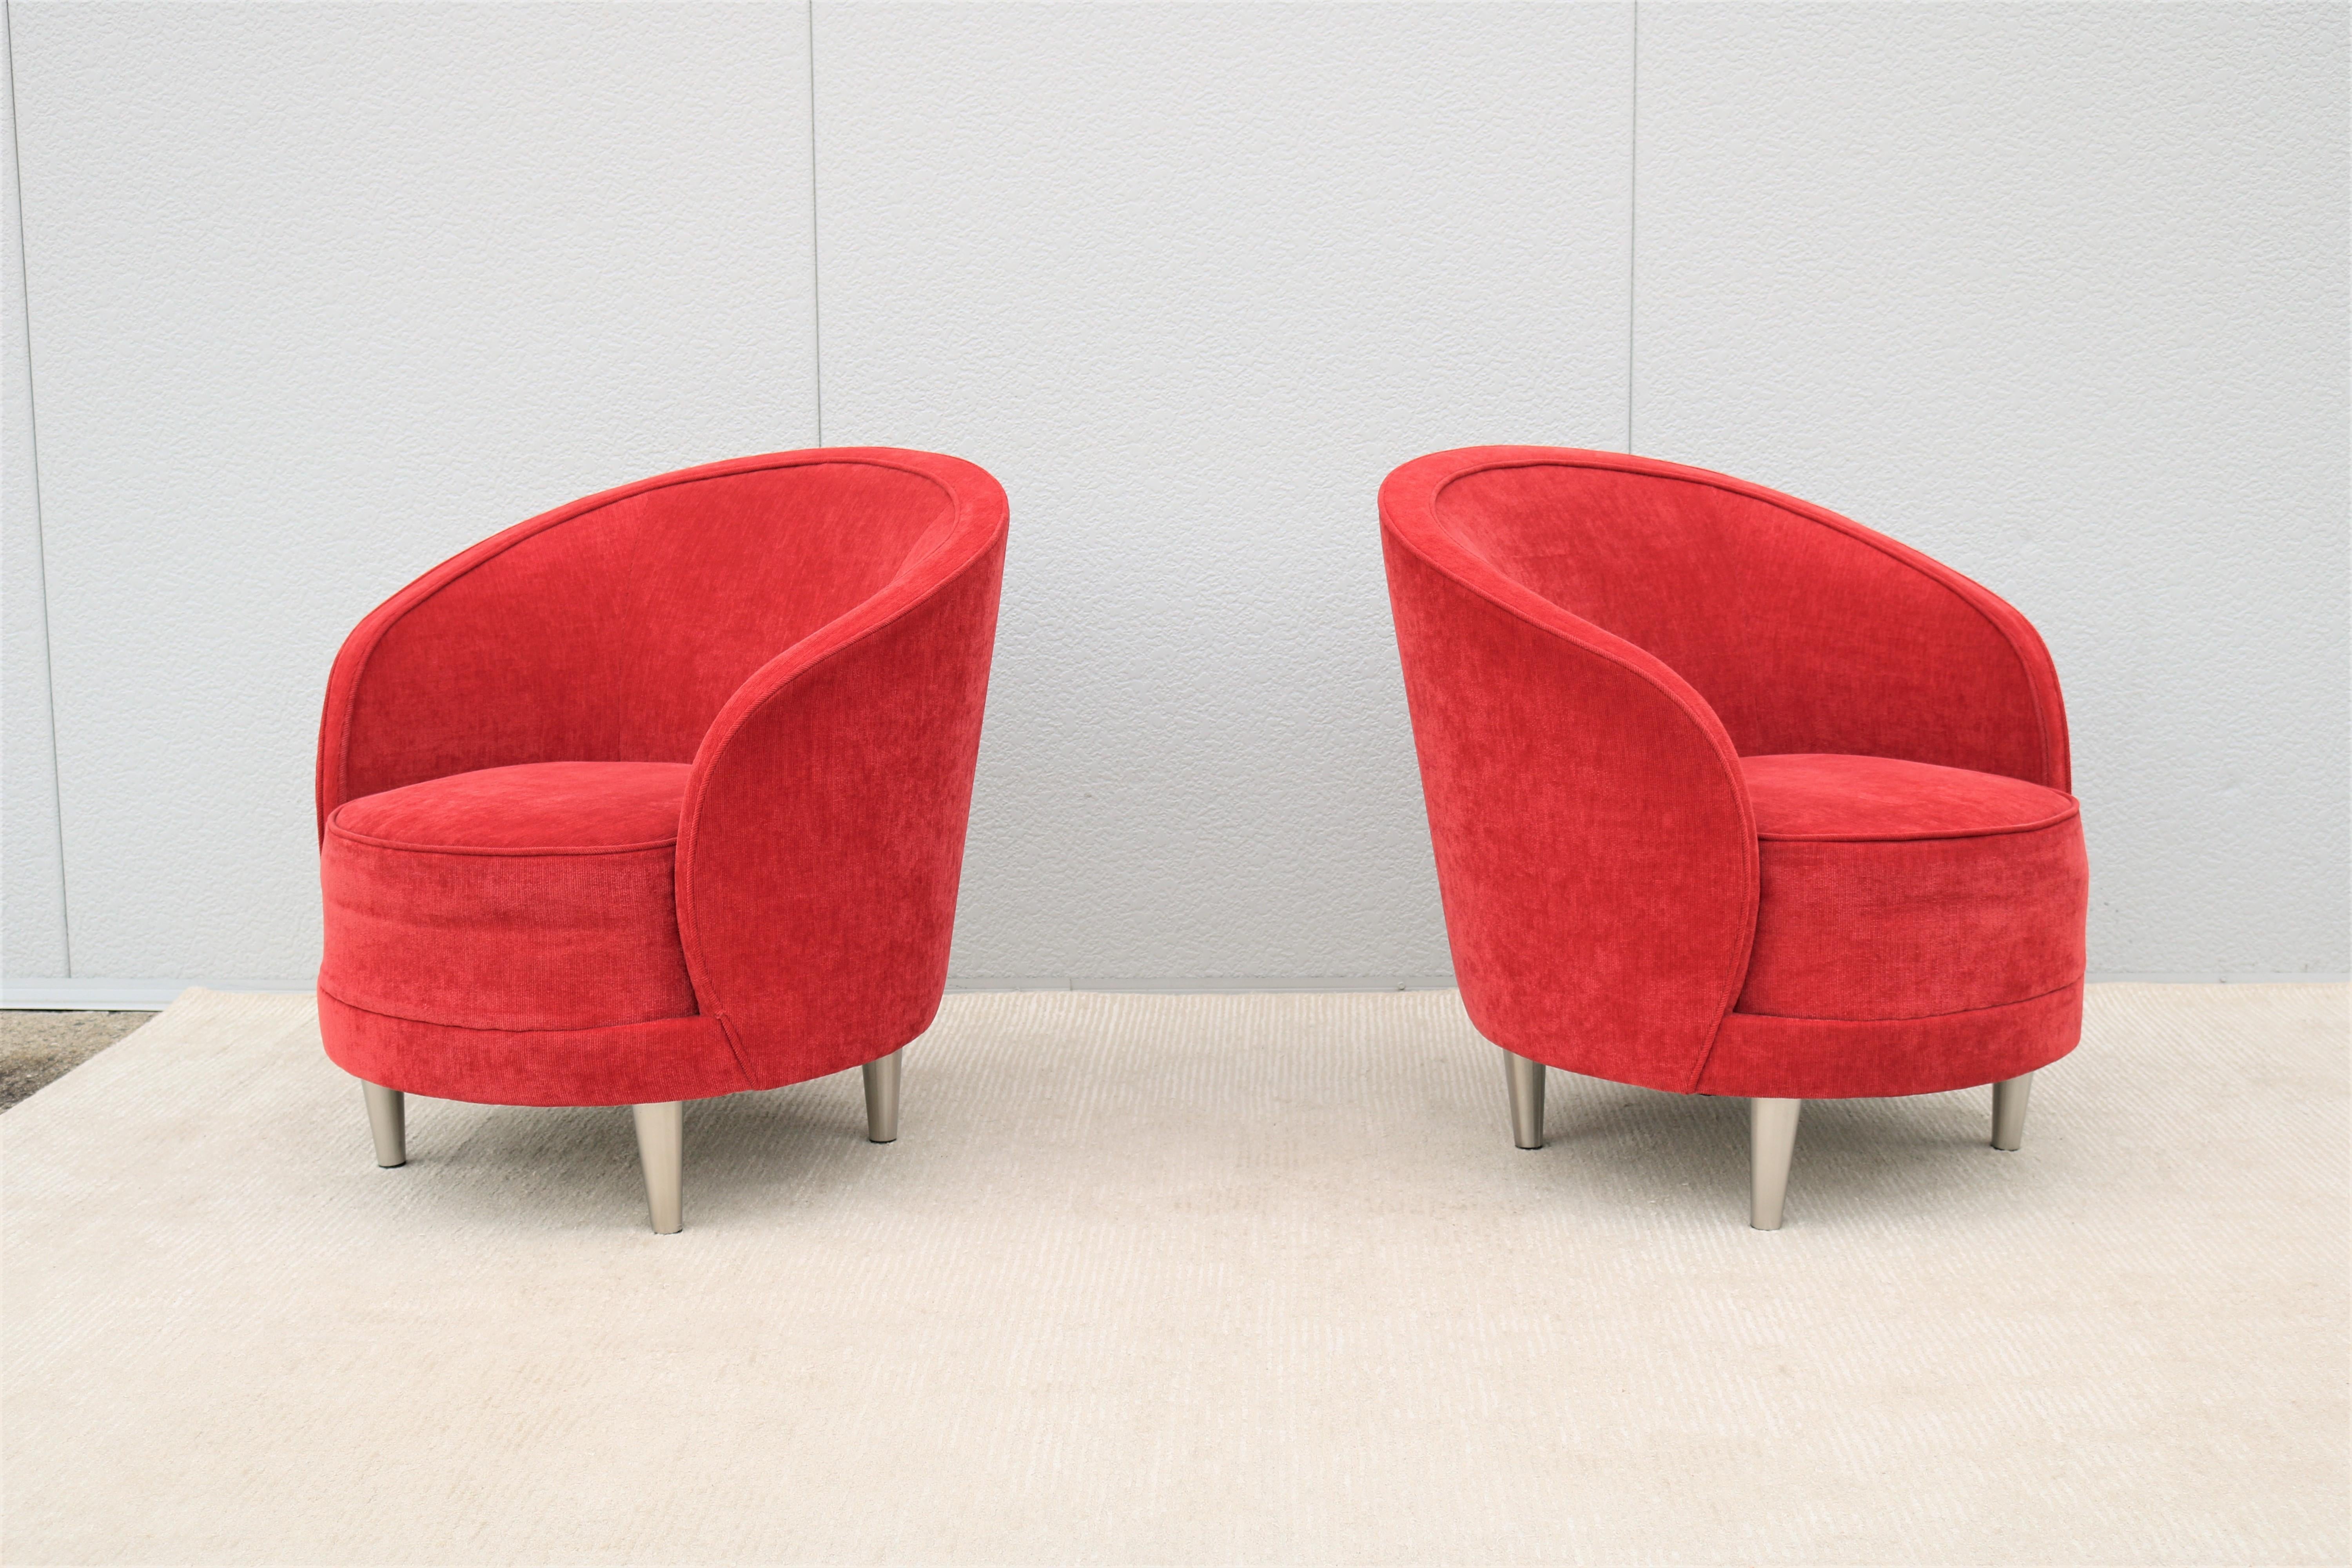 Contemporary Modern Martin Brattrud Kinsale Red Barrel Lounge Chairs, a Pair In Good Condition For Sale In Secaucus, NJ